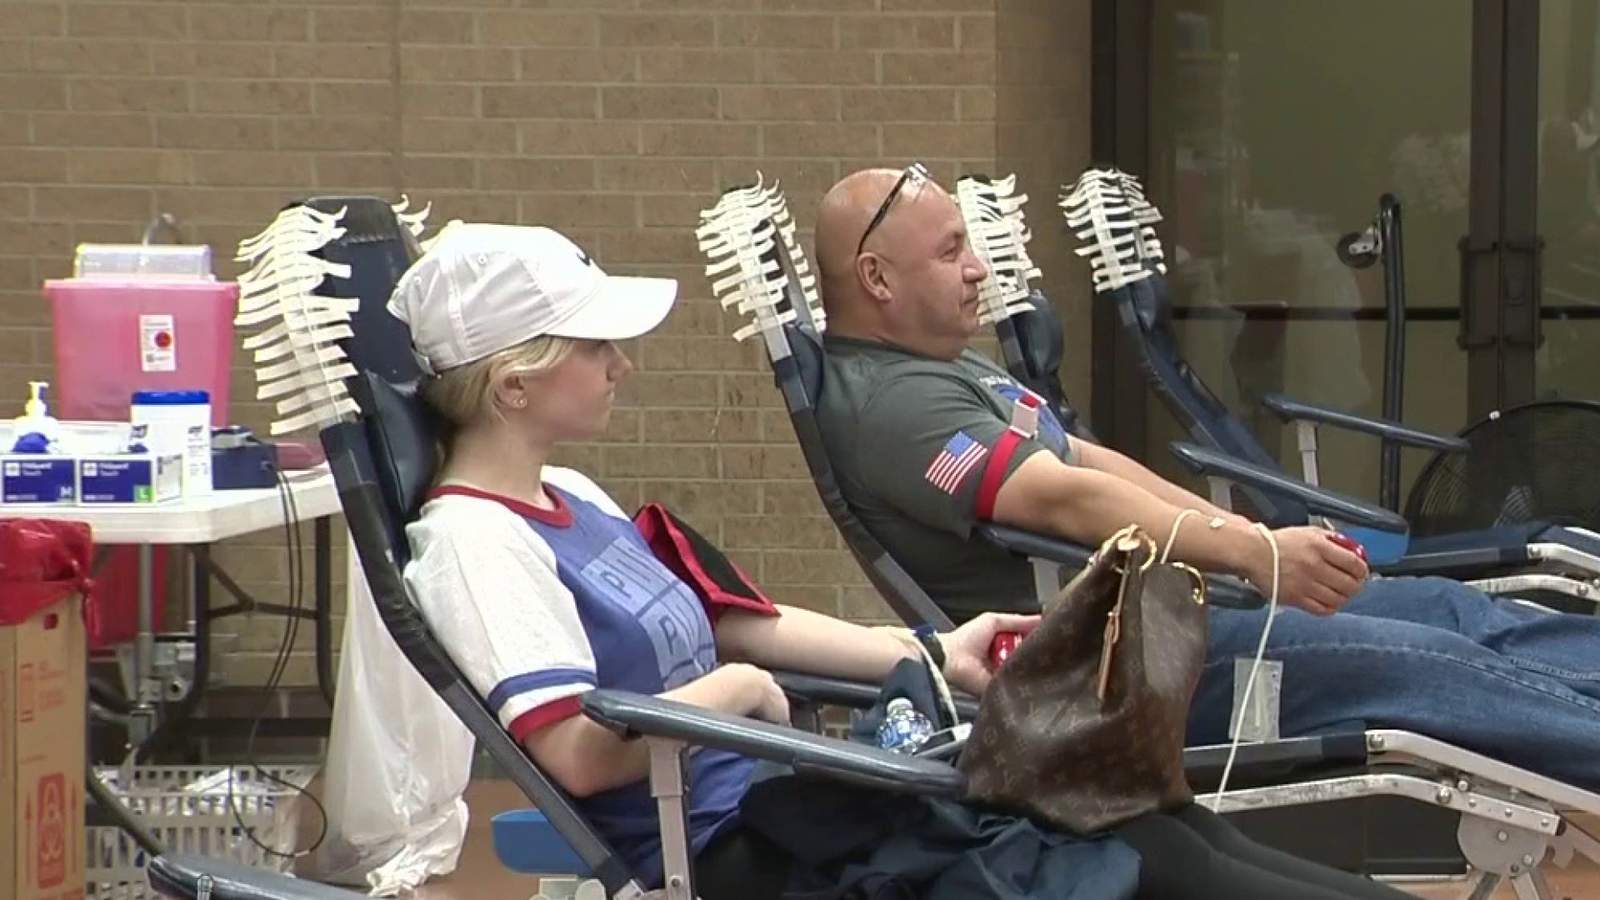 South Texas Blood & Tissue Center holds week-long blood drive to build supply amid coronavirus outbreak